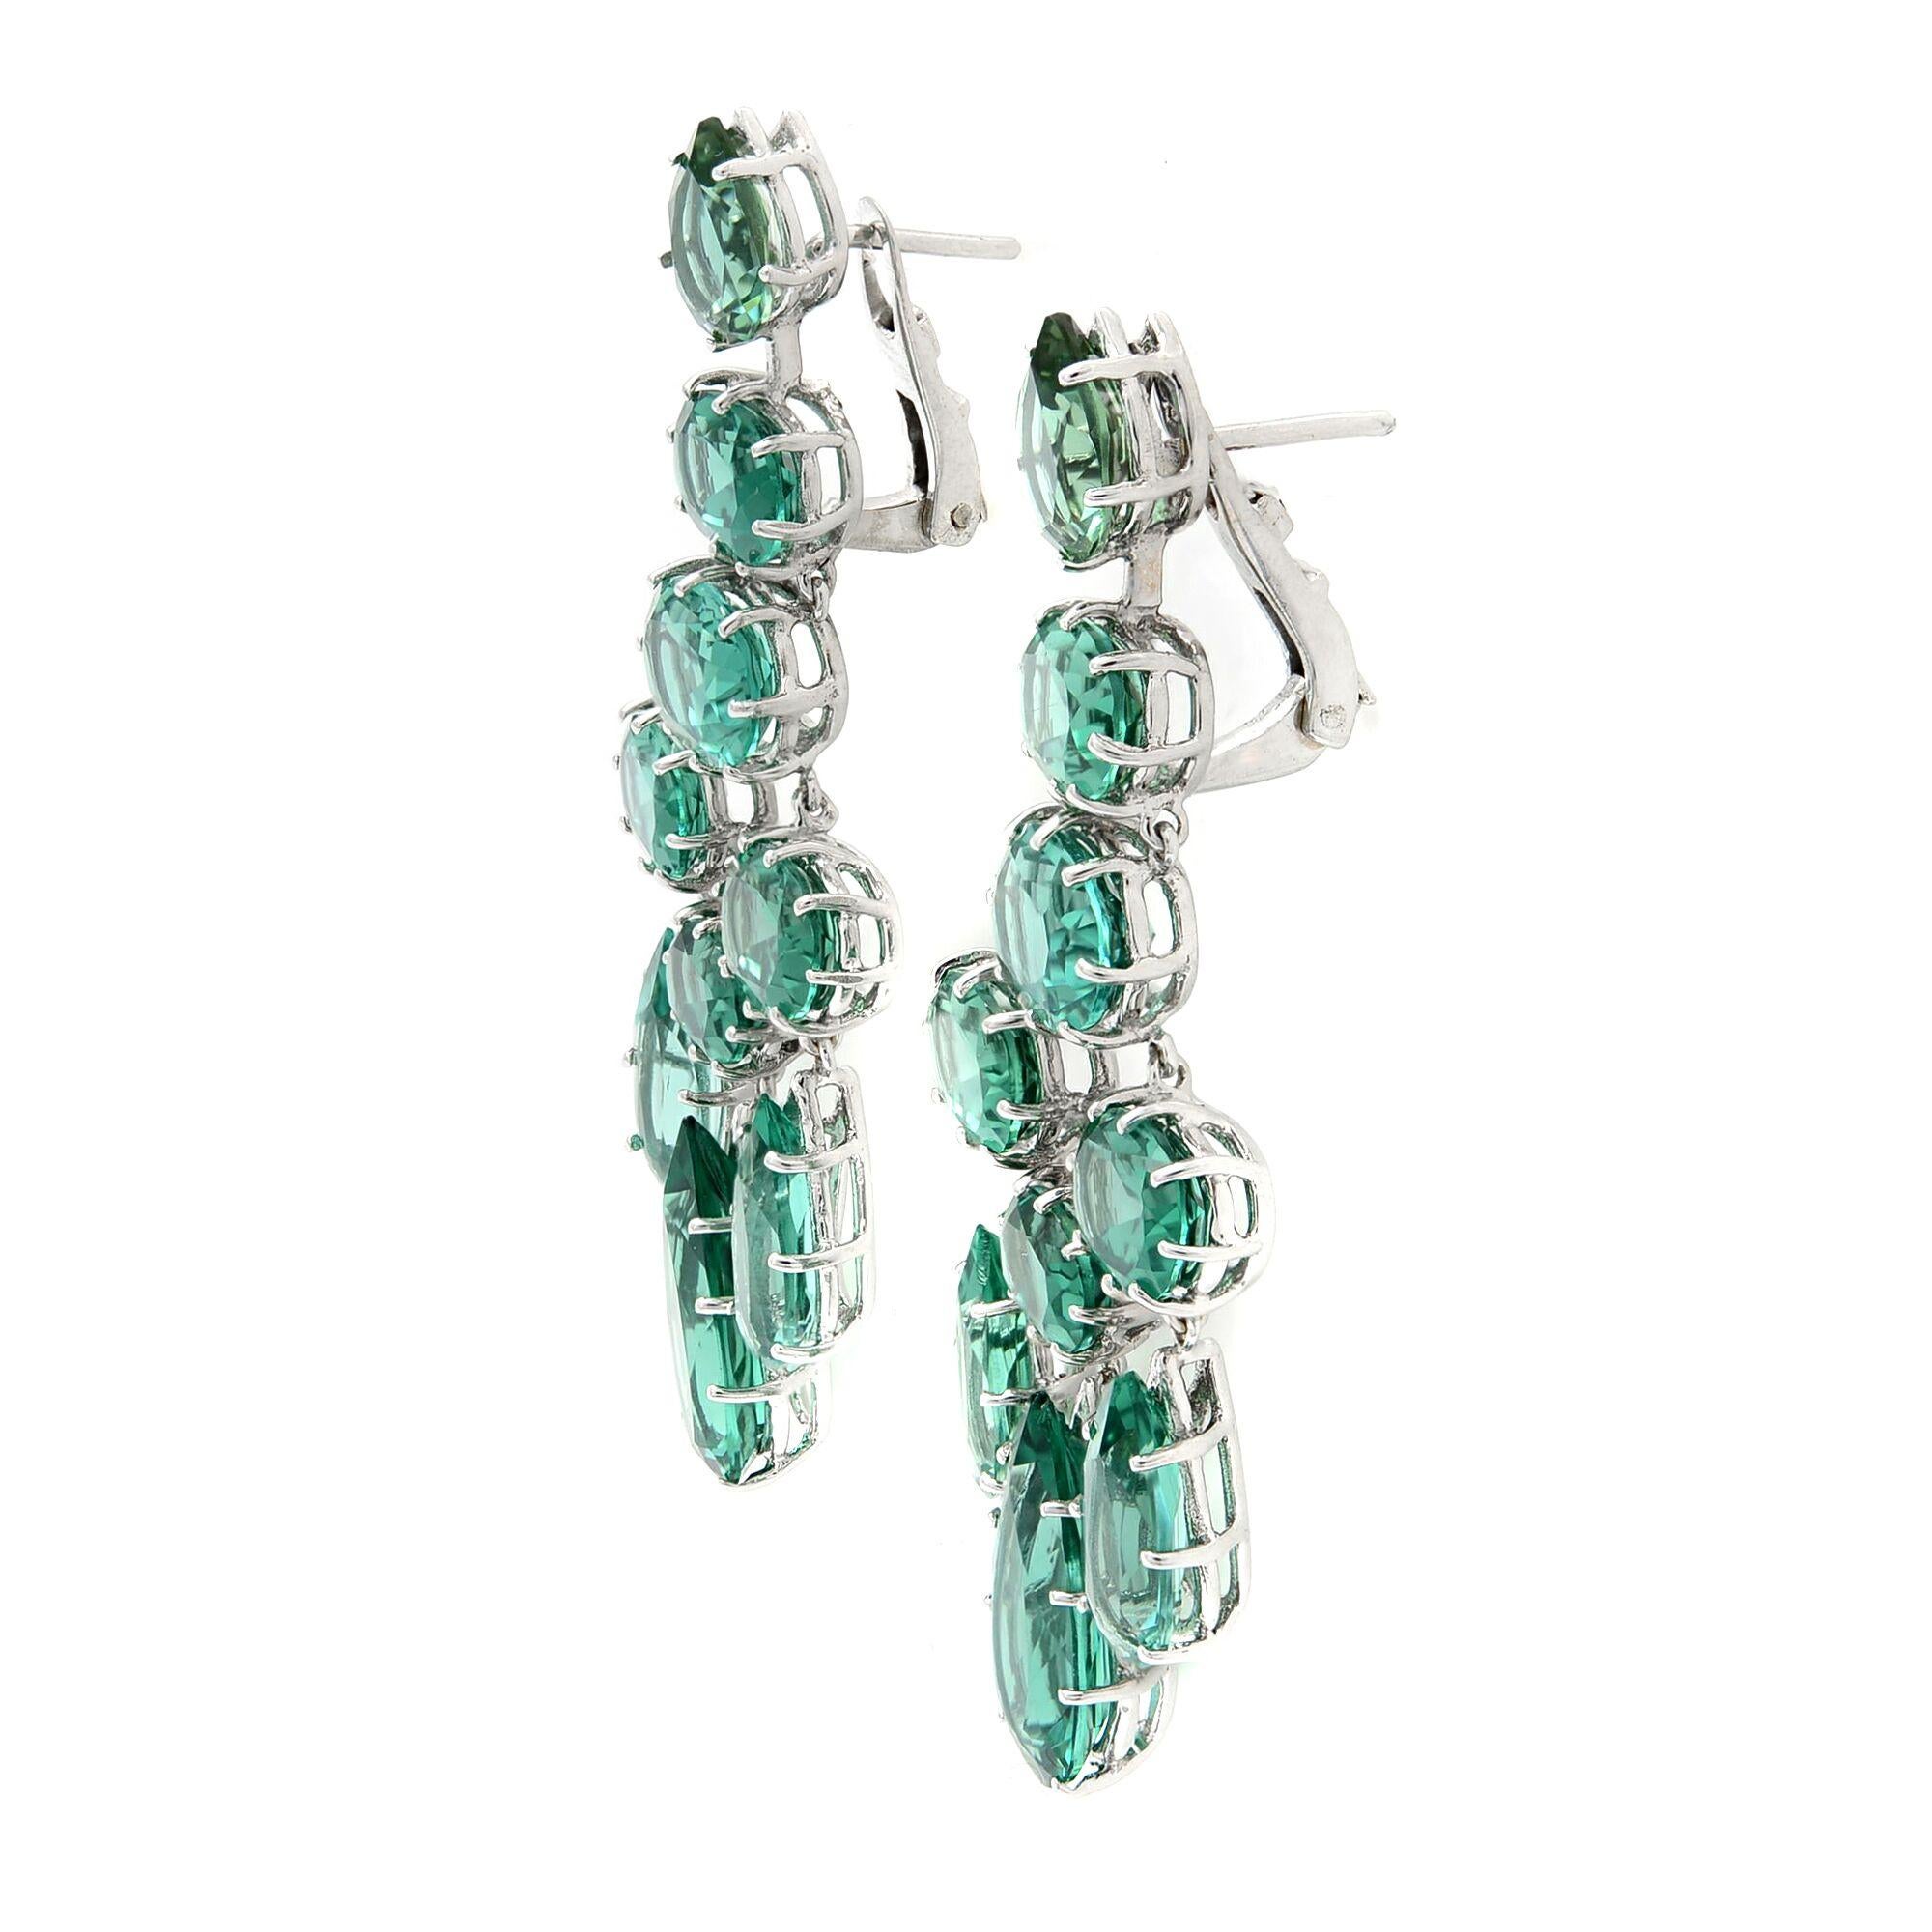 Dramatic yet elegant pair of Green Quartz chandelier drop earrings. Crafted in 14k white gold. Green Quartz weighs: 24.82 carats. Drop length: 2 inches. Closure: French Clip. Total weight: 15.44 grams. Comes with a presentable gift box. 